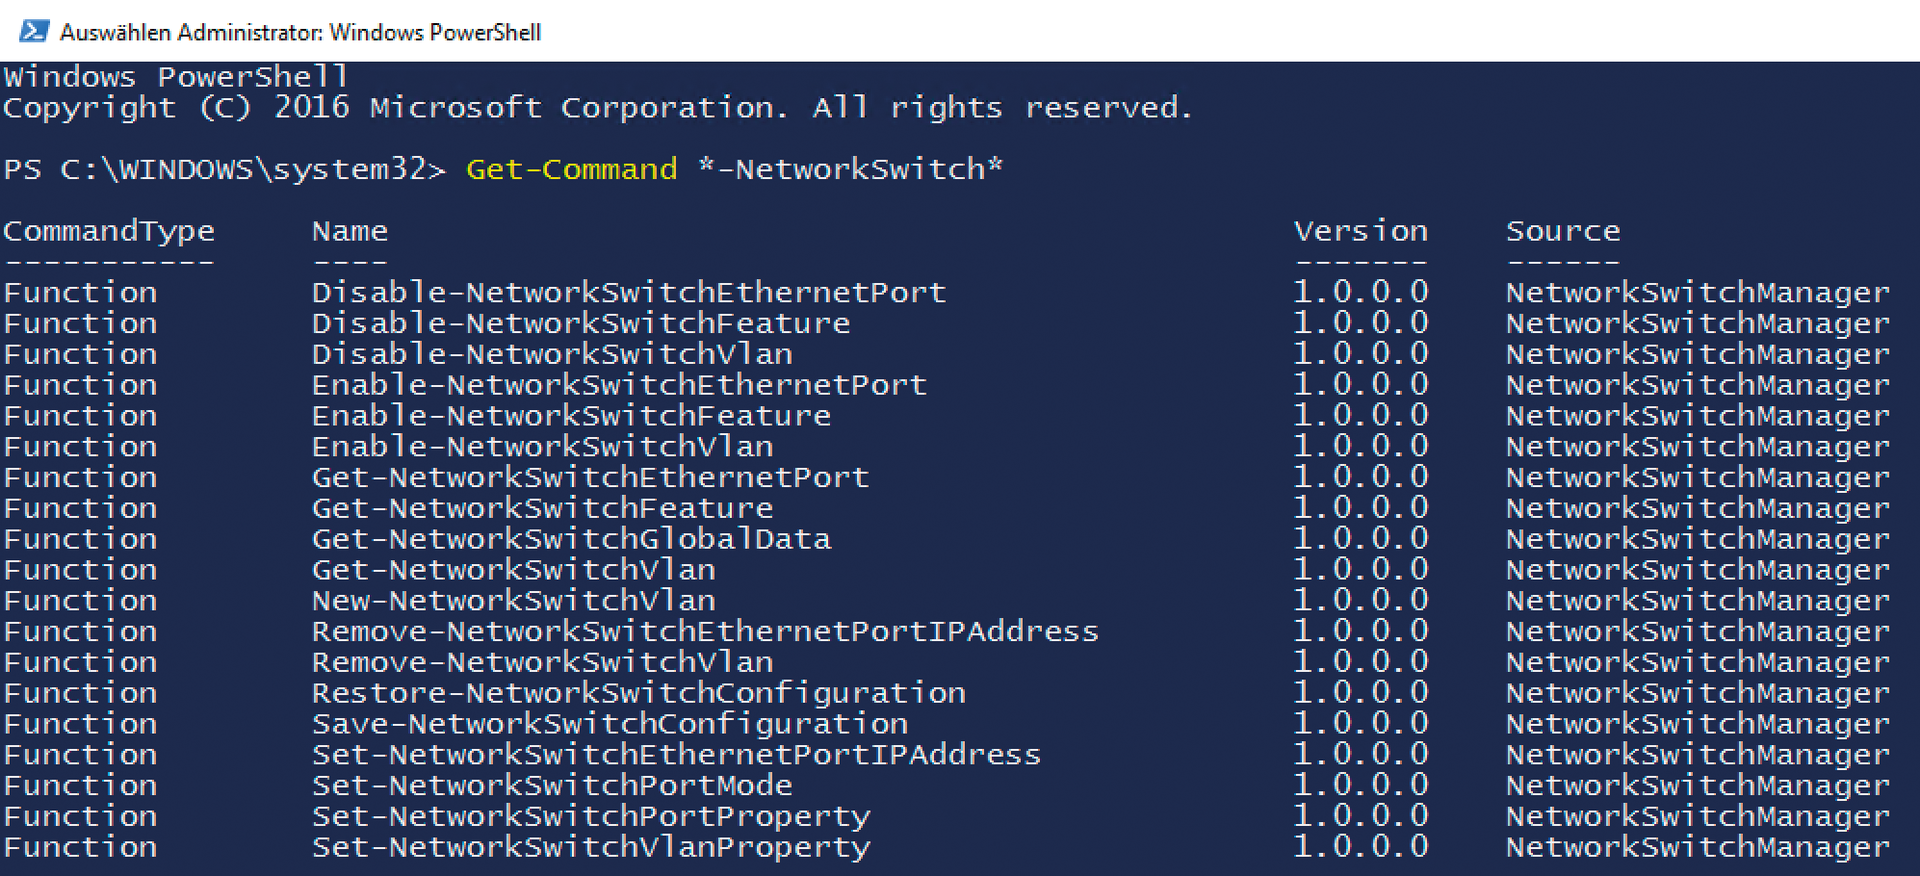 PowerShell cmdlets manage "Certified for Windows" network switches. 